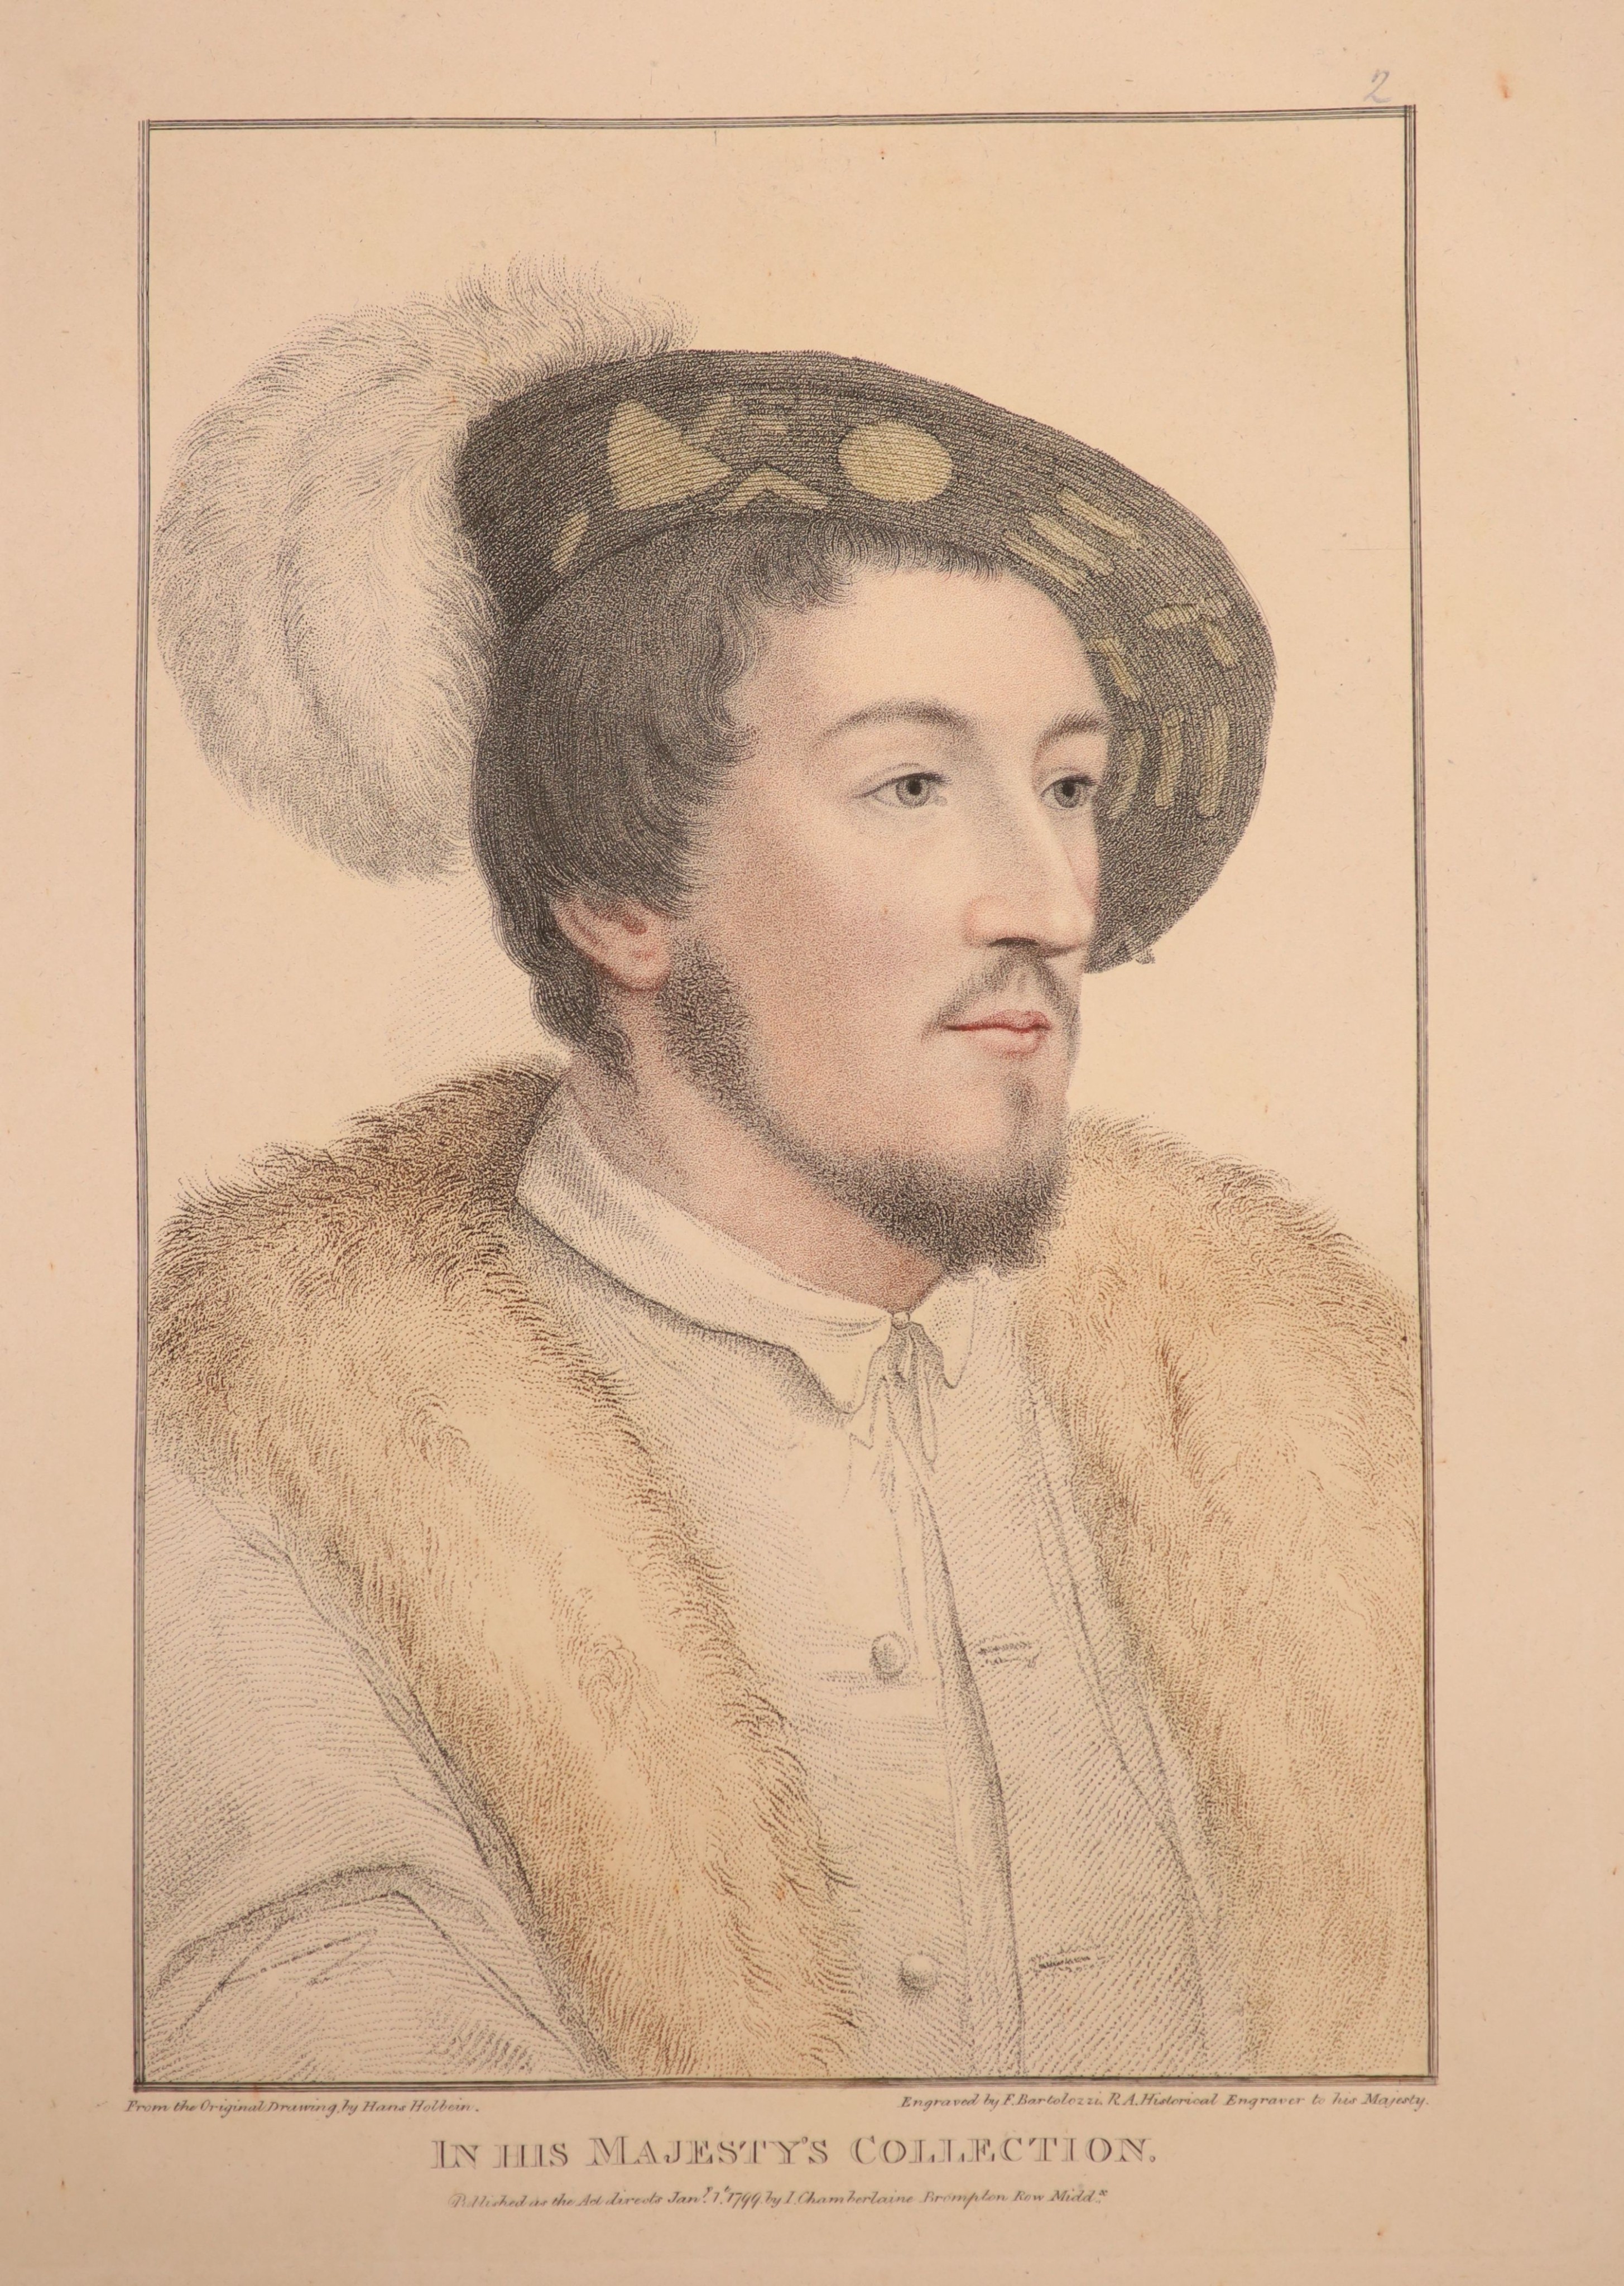 Holbein, Hans - Imitations of Original Drawings by Hans Holbein in the Collection of His Majesty, for the Portraits of Illustrious Persons of the Court of Henry VIII, 2 vols bound in 1, folio, tan morocco gilt, biographi